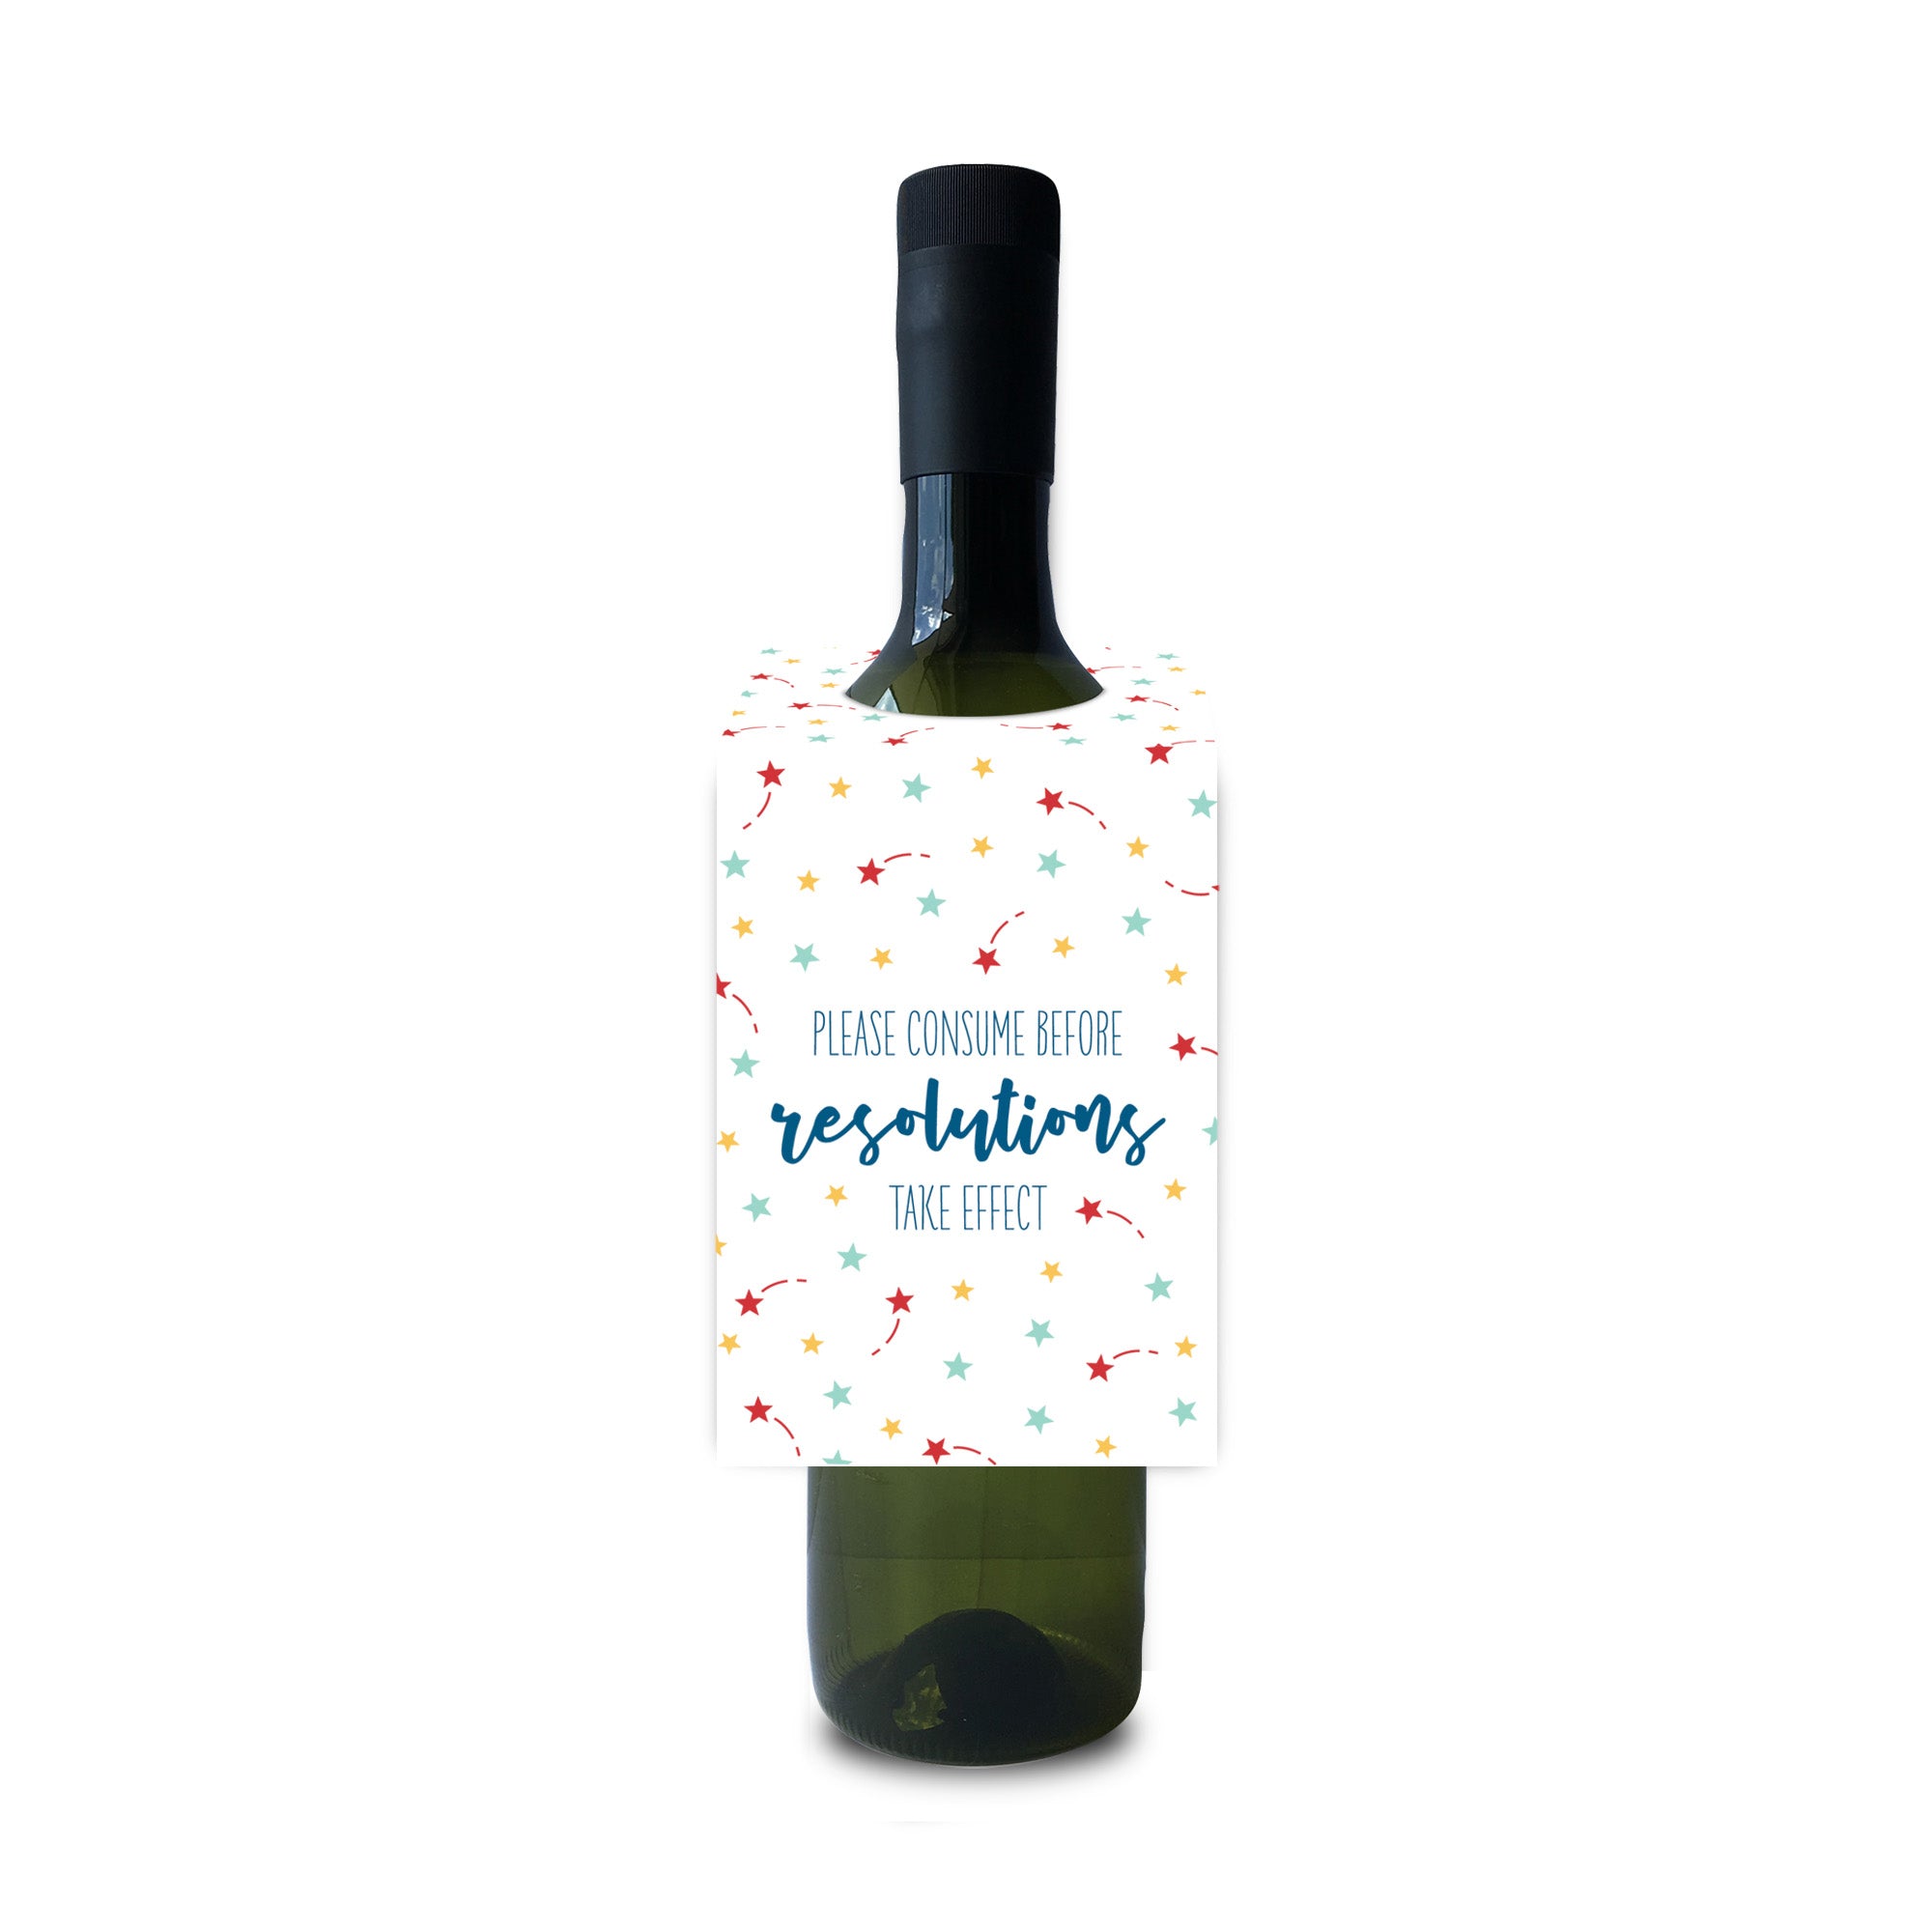 Please consume before resolutions take effect new years wine and spirit tag by I&